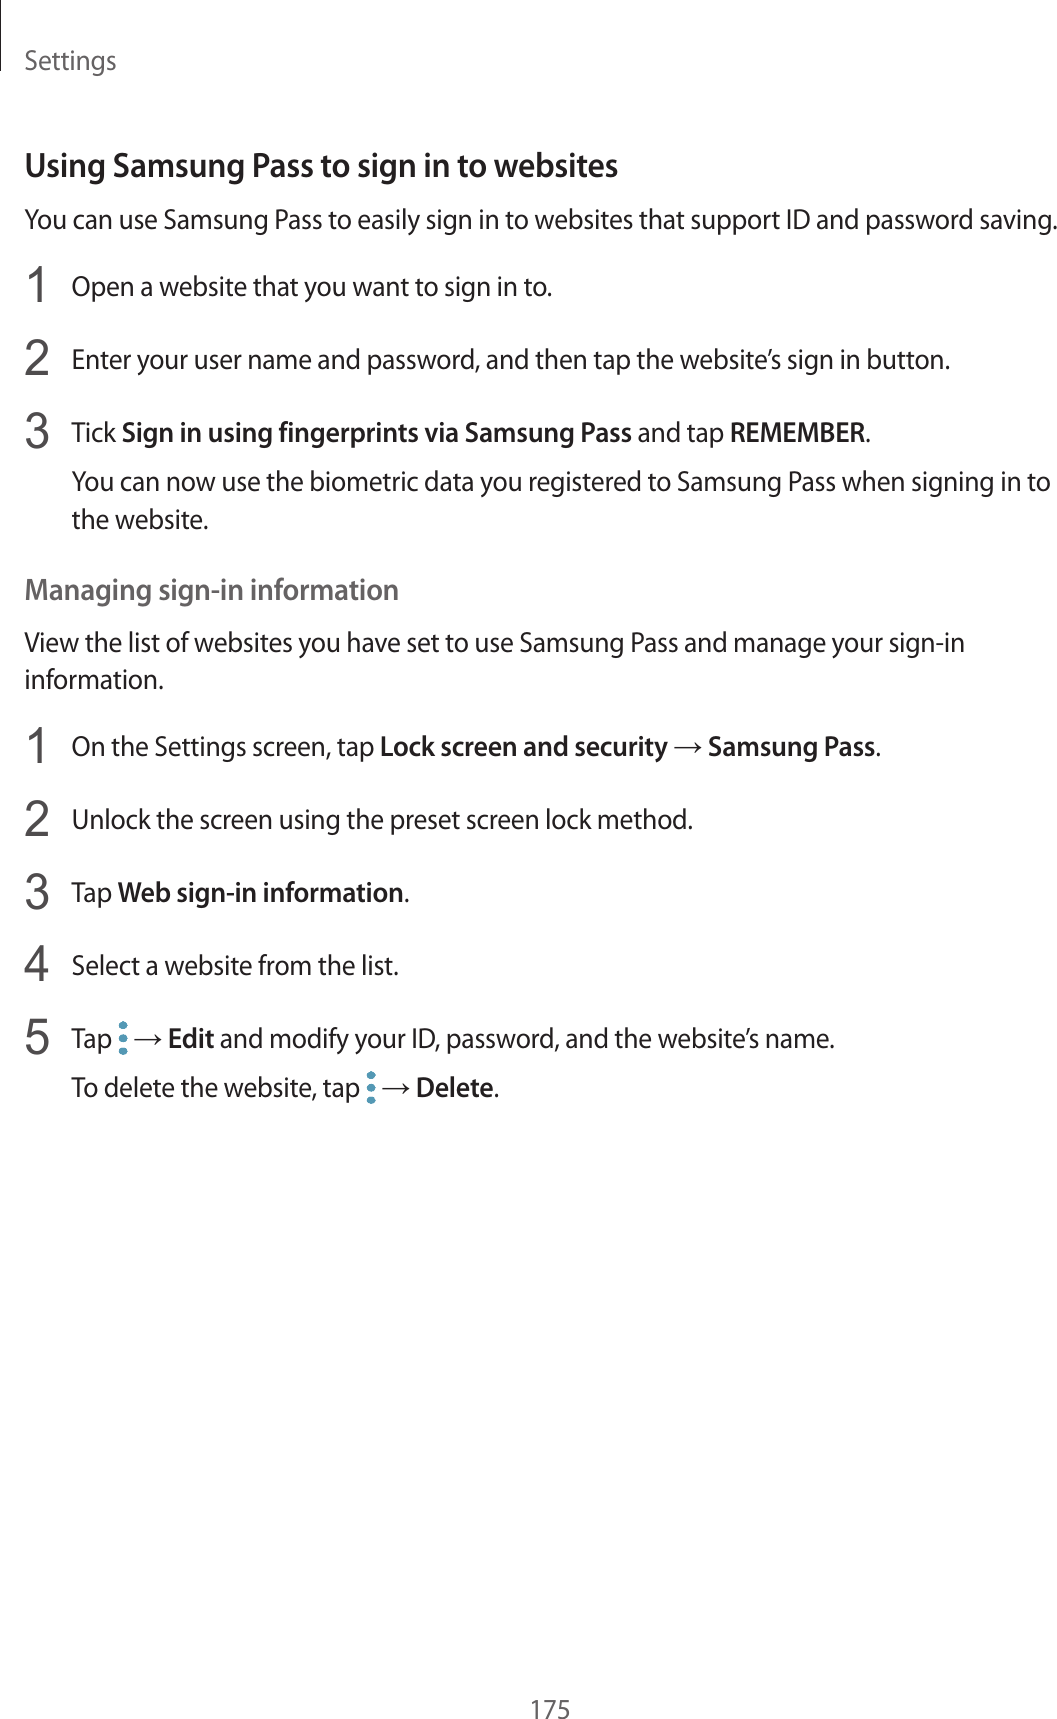 Settings175Using Samsung Pass to sign in to websitesYou can use Samsung Pass to easily sign in to websites that support ID and password saving.1  Open a website that you want to sign in to.2  Enter your user name and password, and then tap the website’s sign in button.3  Tick Sign in using fingerprints via Samsung Pass and tap REMEMBER.You can now use the biometric data you registered to Samsung Pass when signing in to the website.Managing sign-in informationView the list of websites you have set to use Samsung Pass and manage your sign-in information.1  On the Settings screen, tap Lock screen and security → Samsung Pass.2  Unlock the screen using the preset screen lock method.3  Tap Web sign-in information.4  Select a website from the list.5  Tap   → Edit and modify your ID, password, and the website’s name.To delete the website, tap   → Delete.